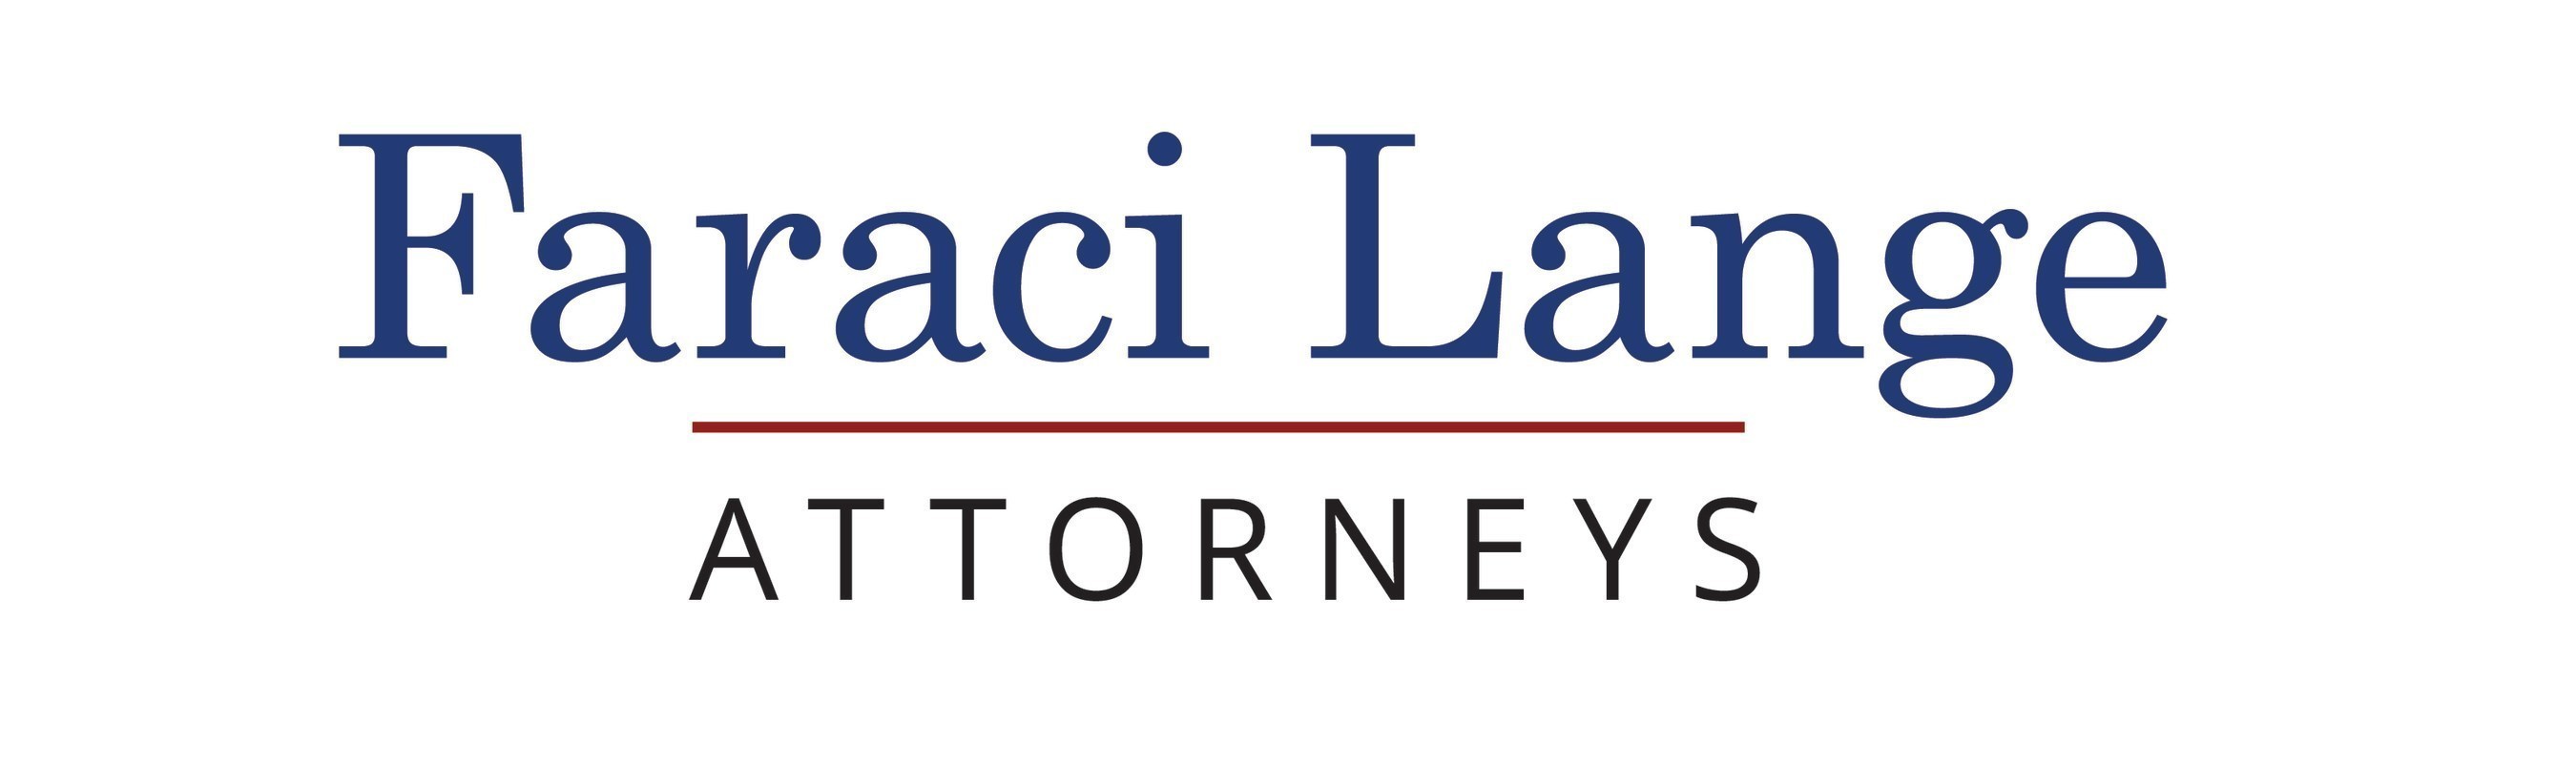 Faraci Lange attorneys have the experience your case requires. Contact us for a free legal consultation today.